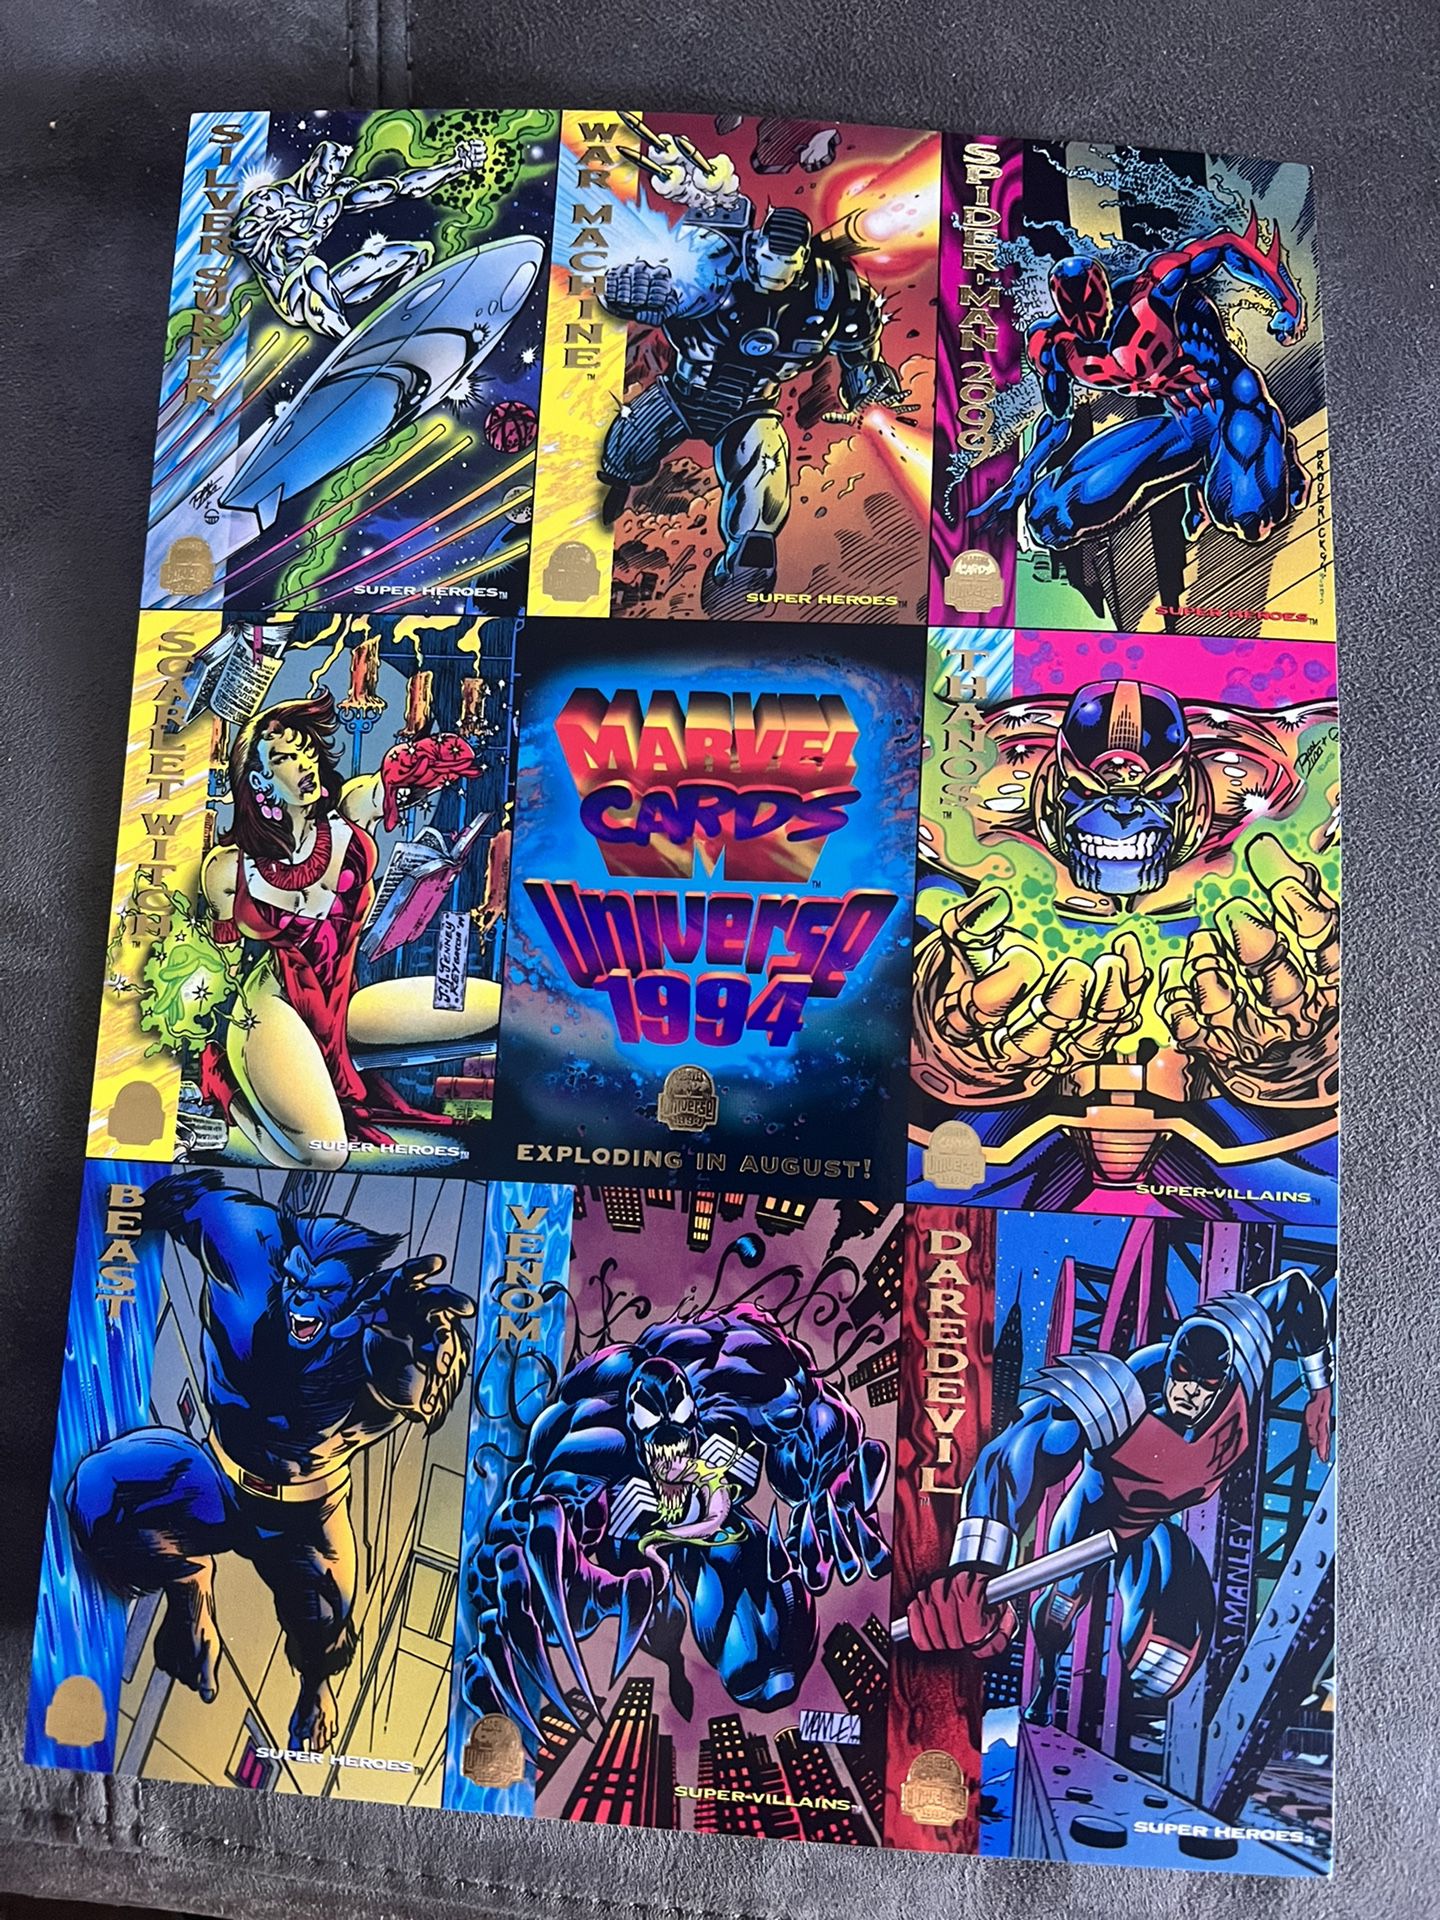 MARVEL CARDS UNIVERSE 1994 SELL SHEET